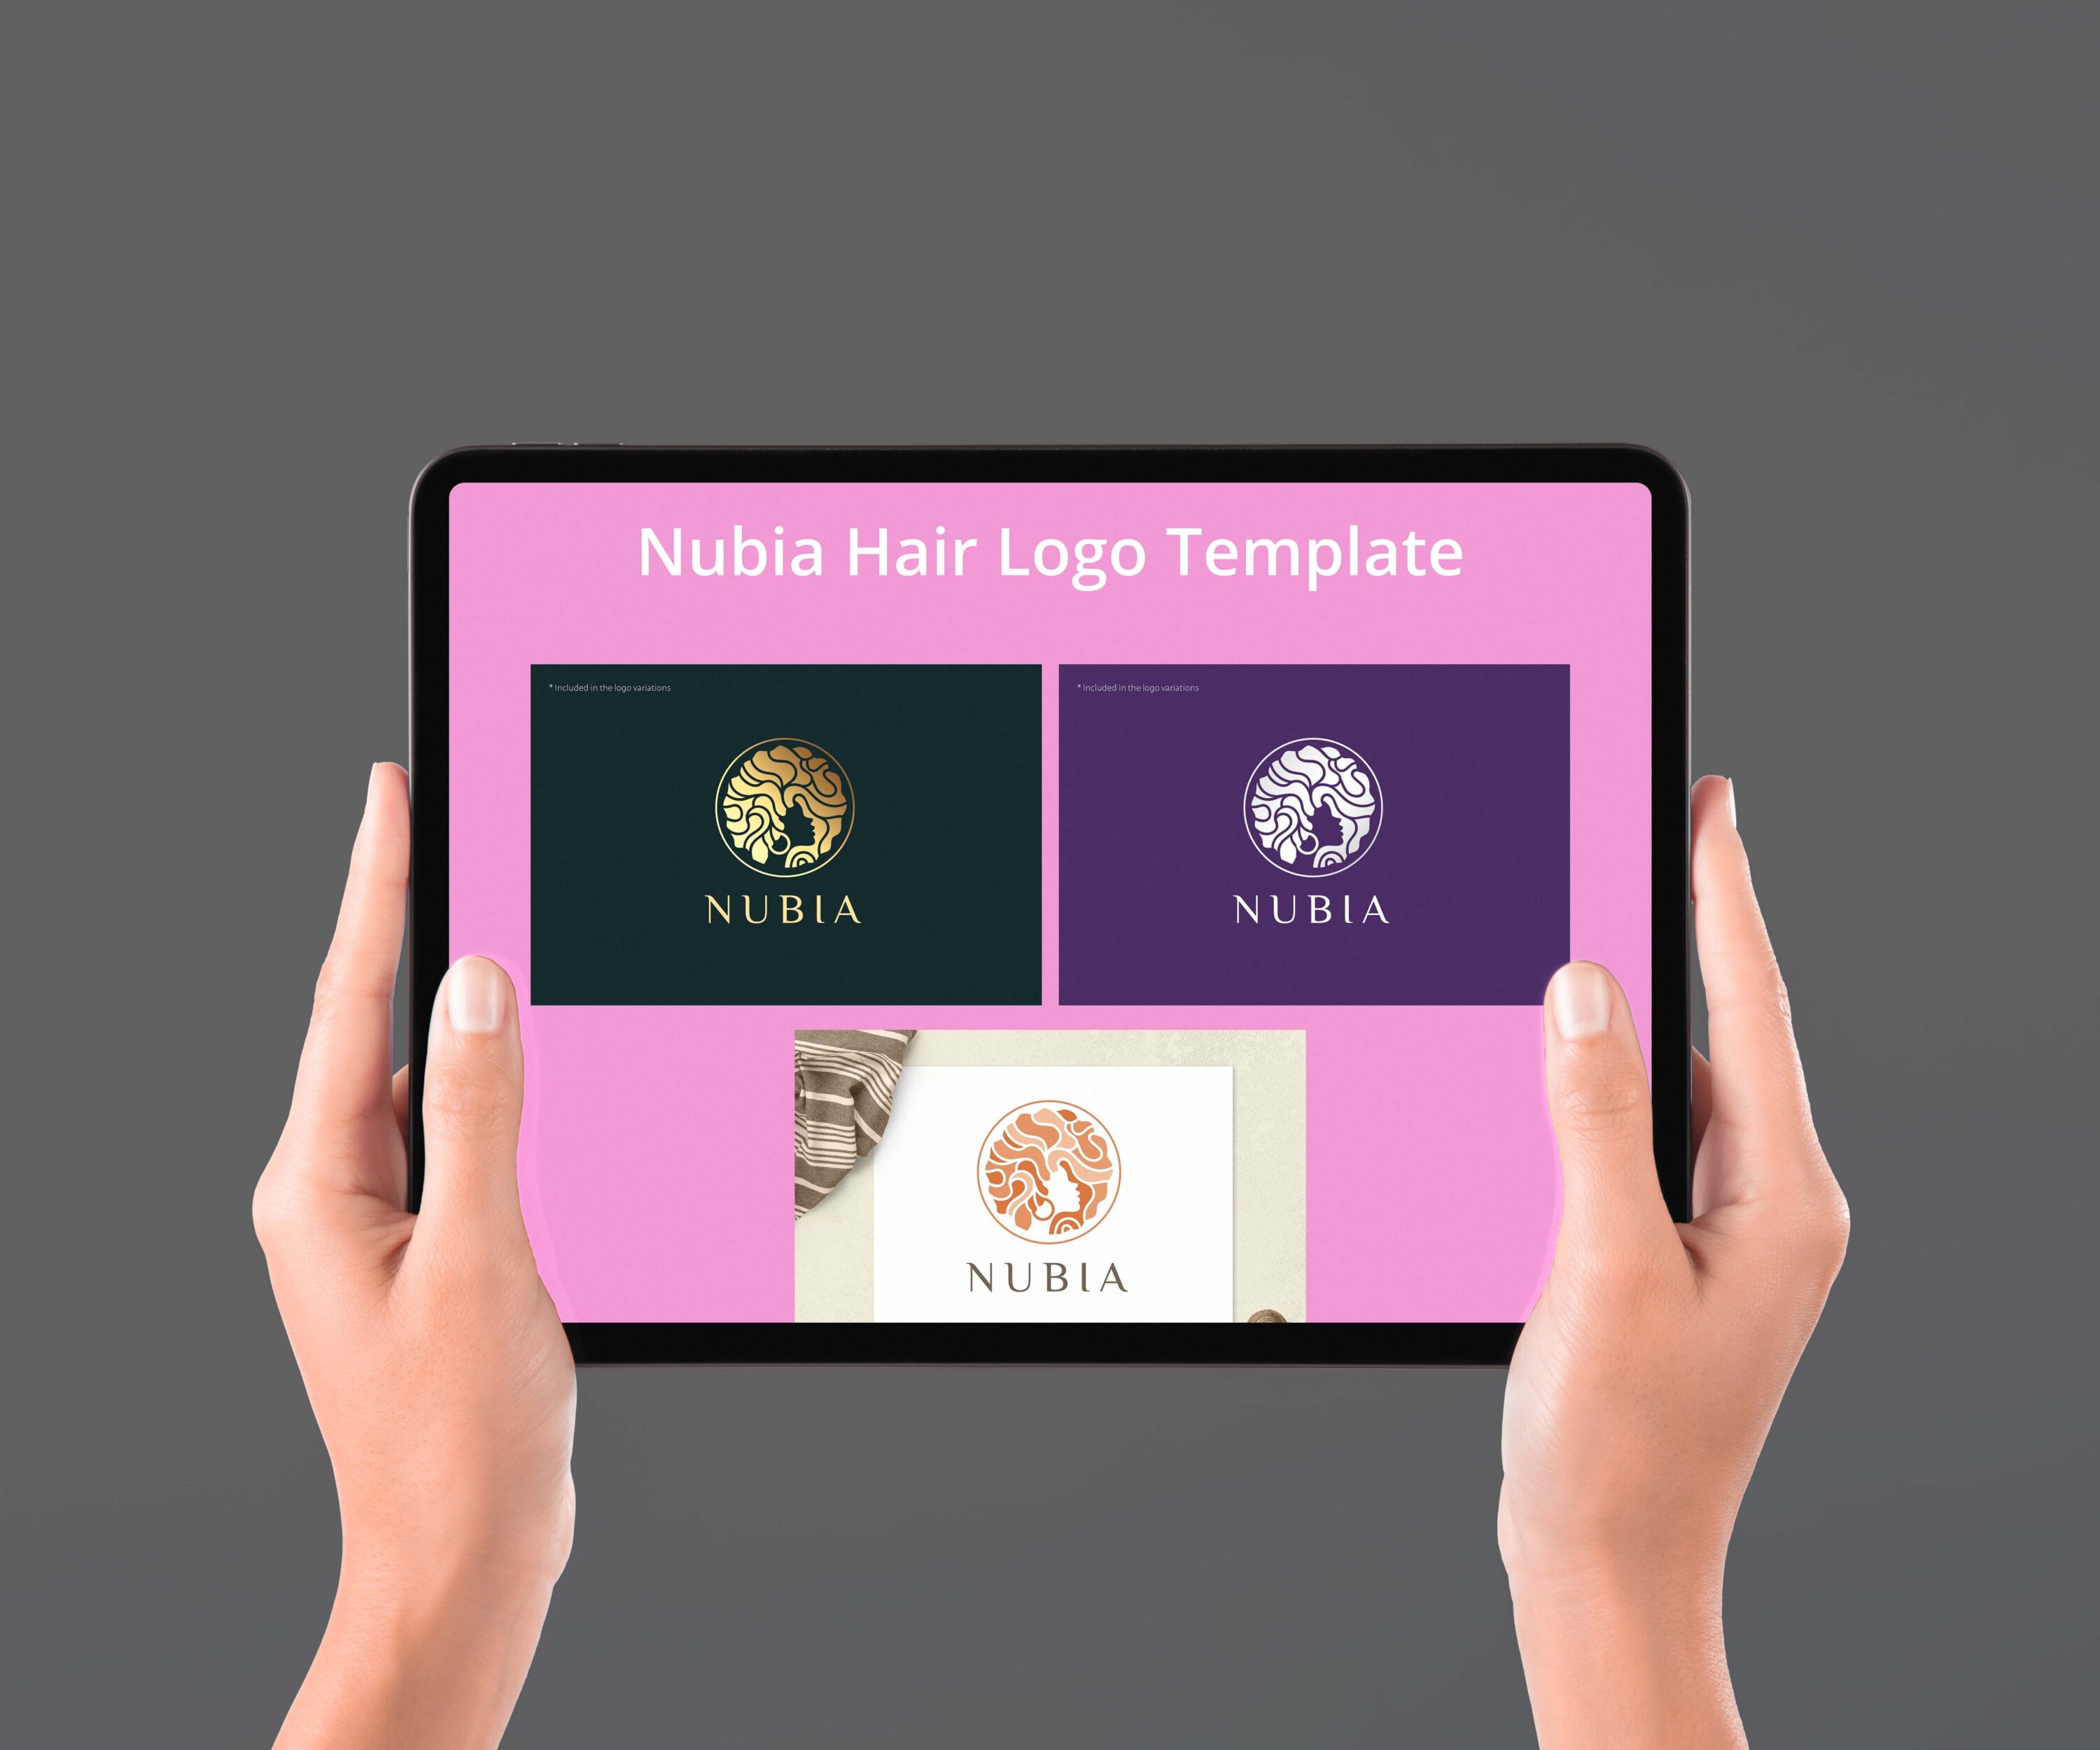 Nubia Hair Logo Template tablet preview.